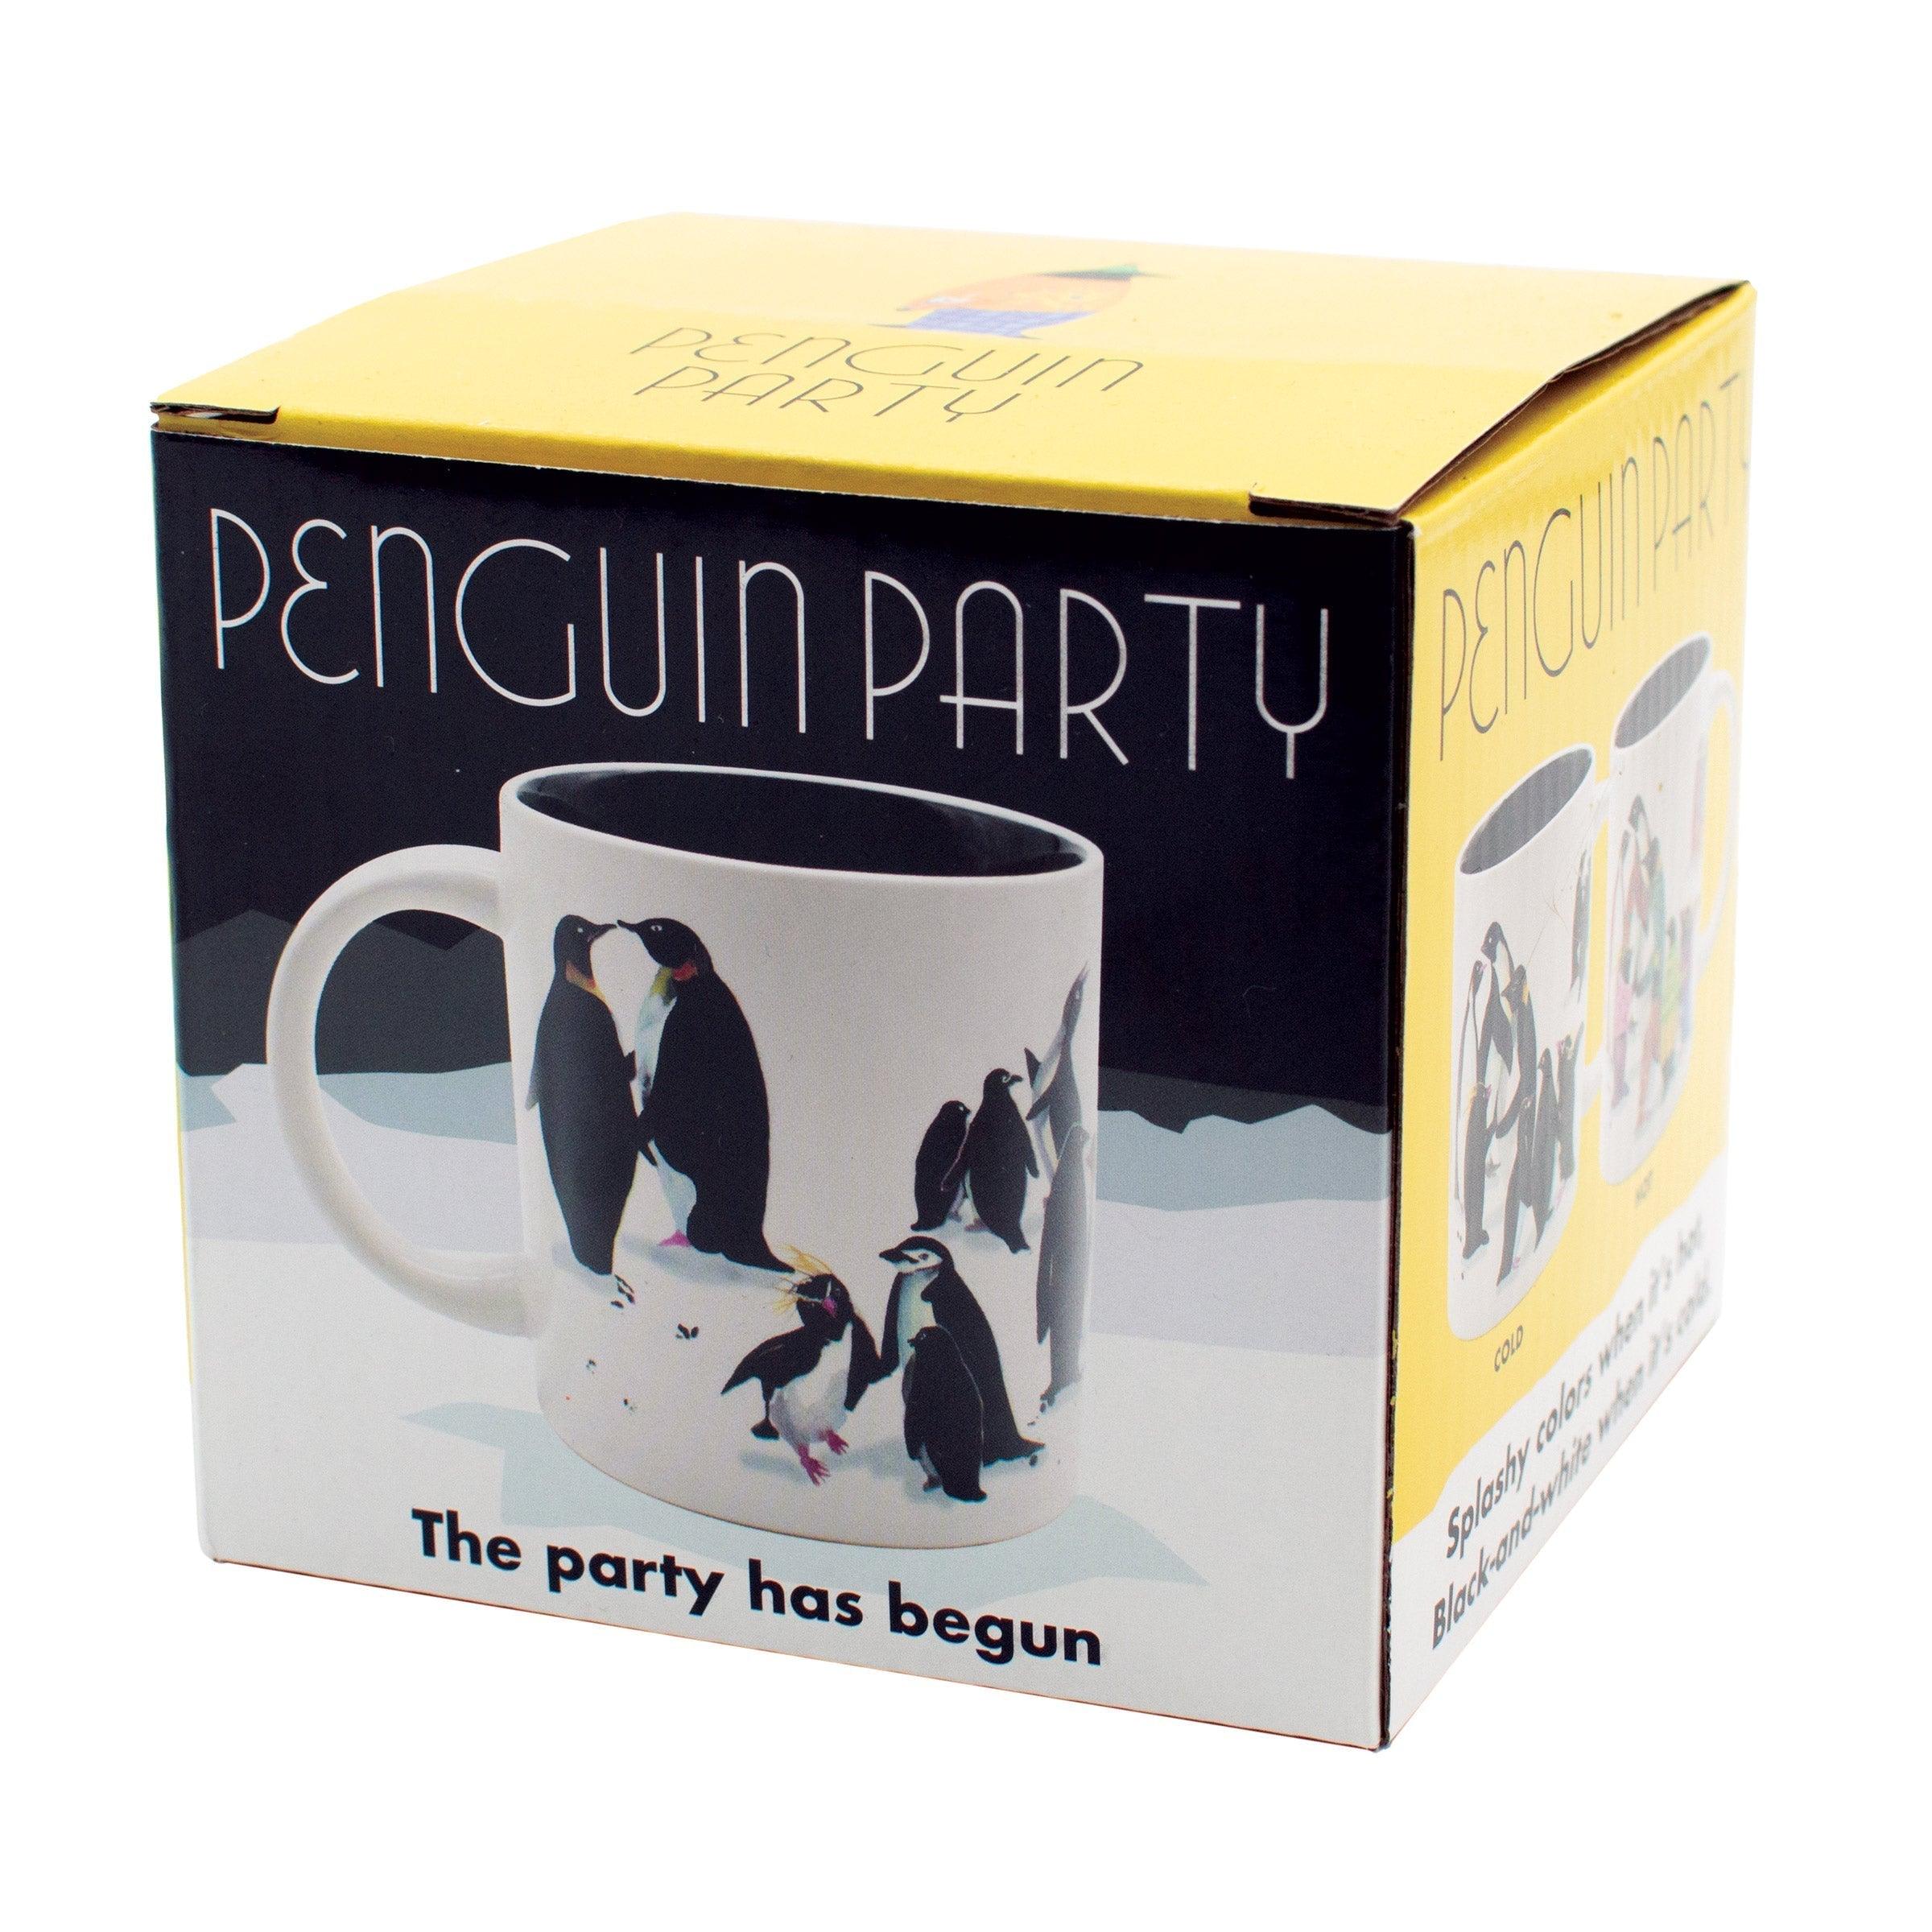 Product photo of Penguin Party Heat-Changing Mug, a novelty gift manufactured by The Unemployed Philosophers Guild.